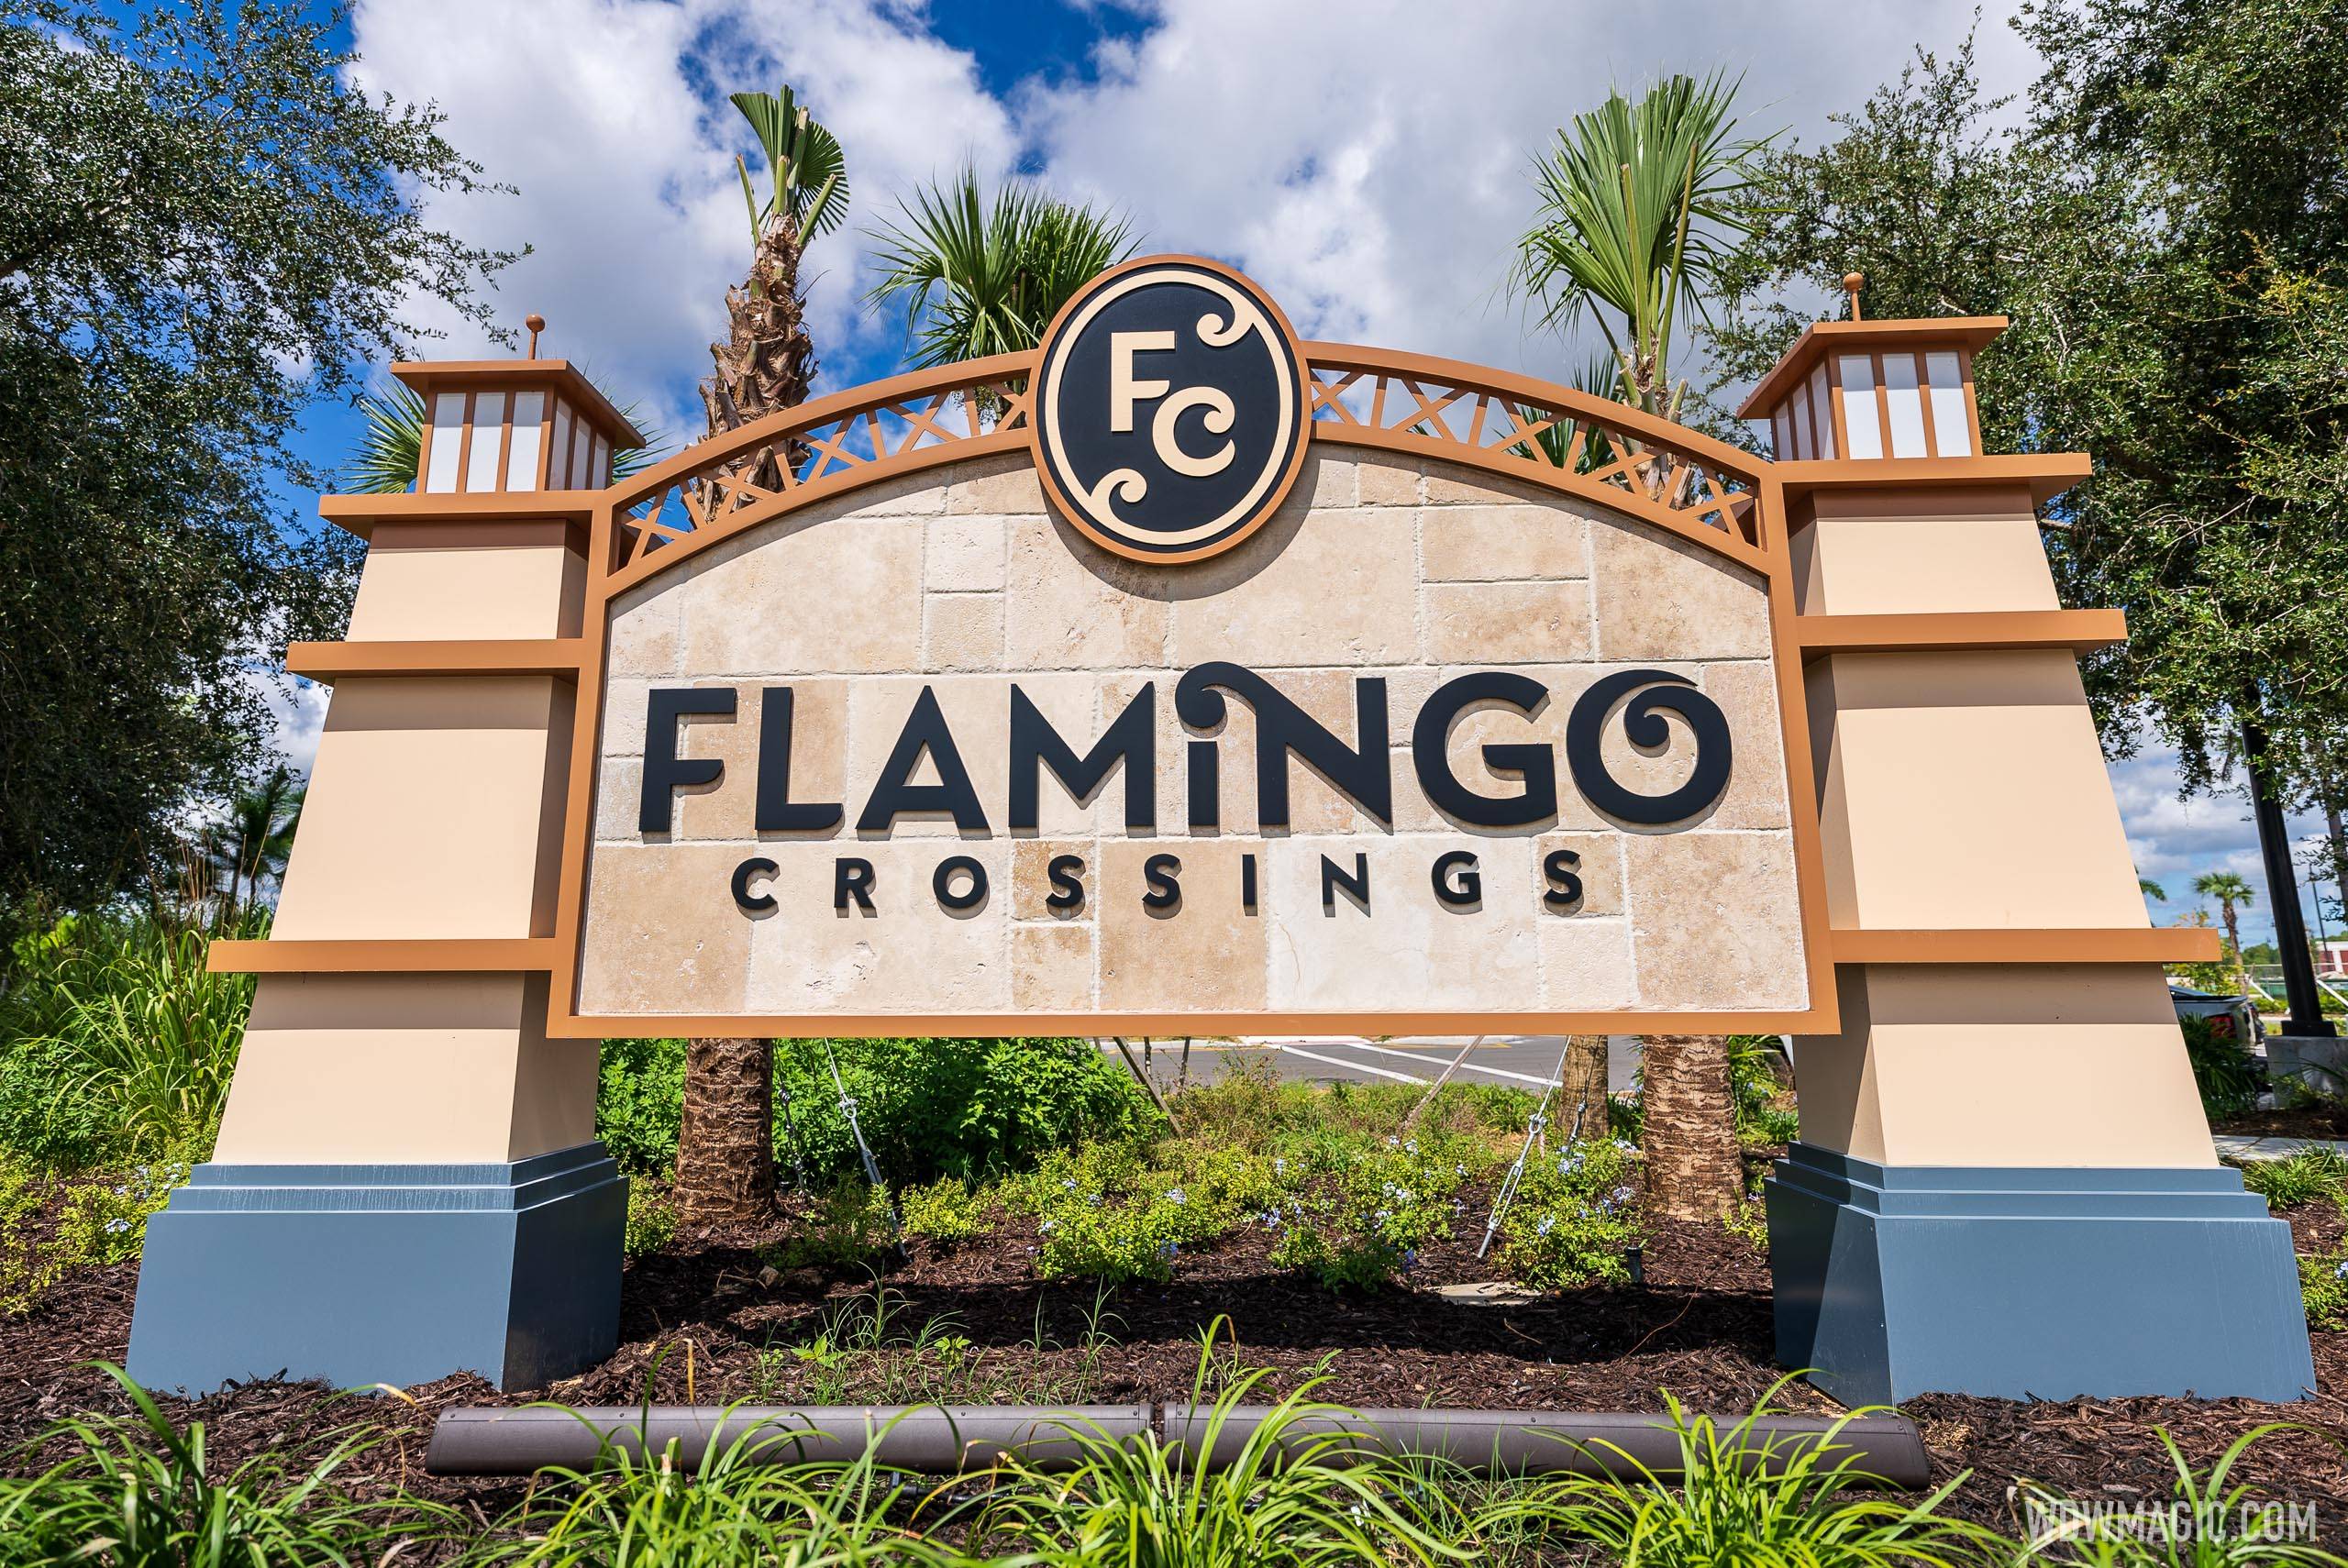 First retail store opens at the Disney planned Flamingo Crossings just outside Walt Disney World